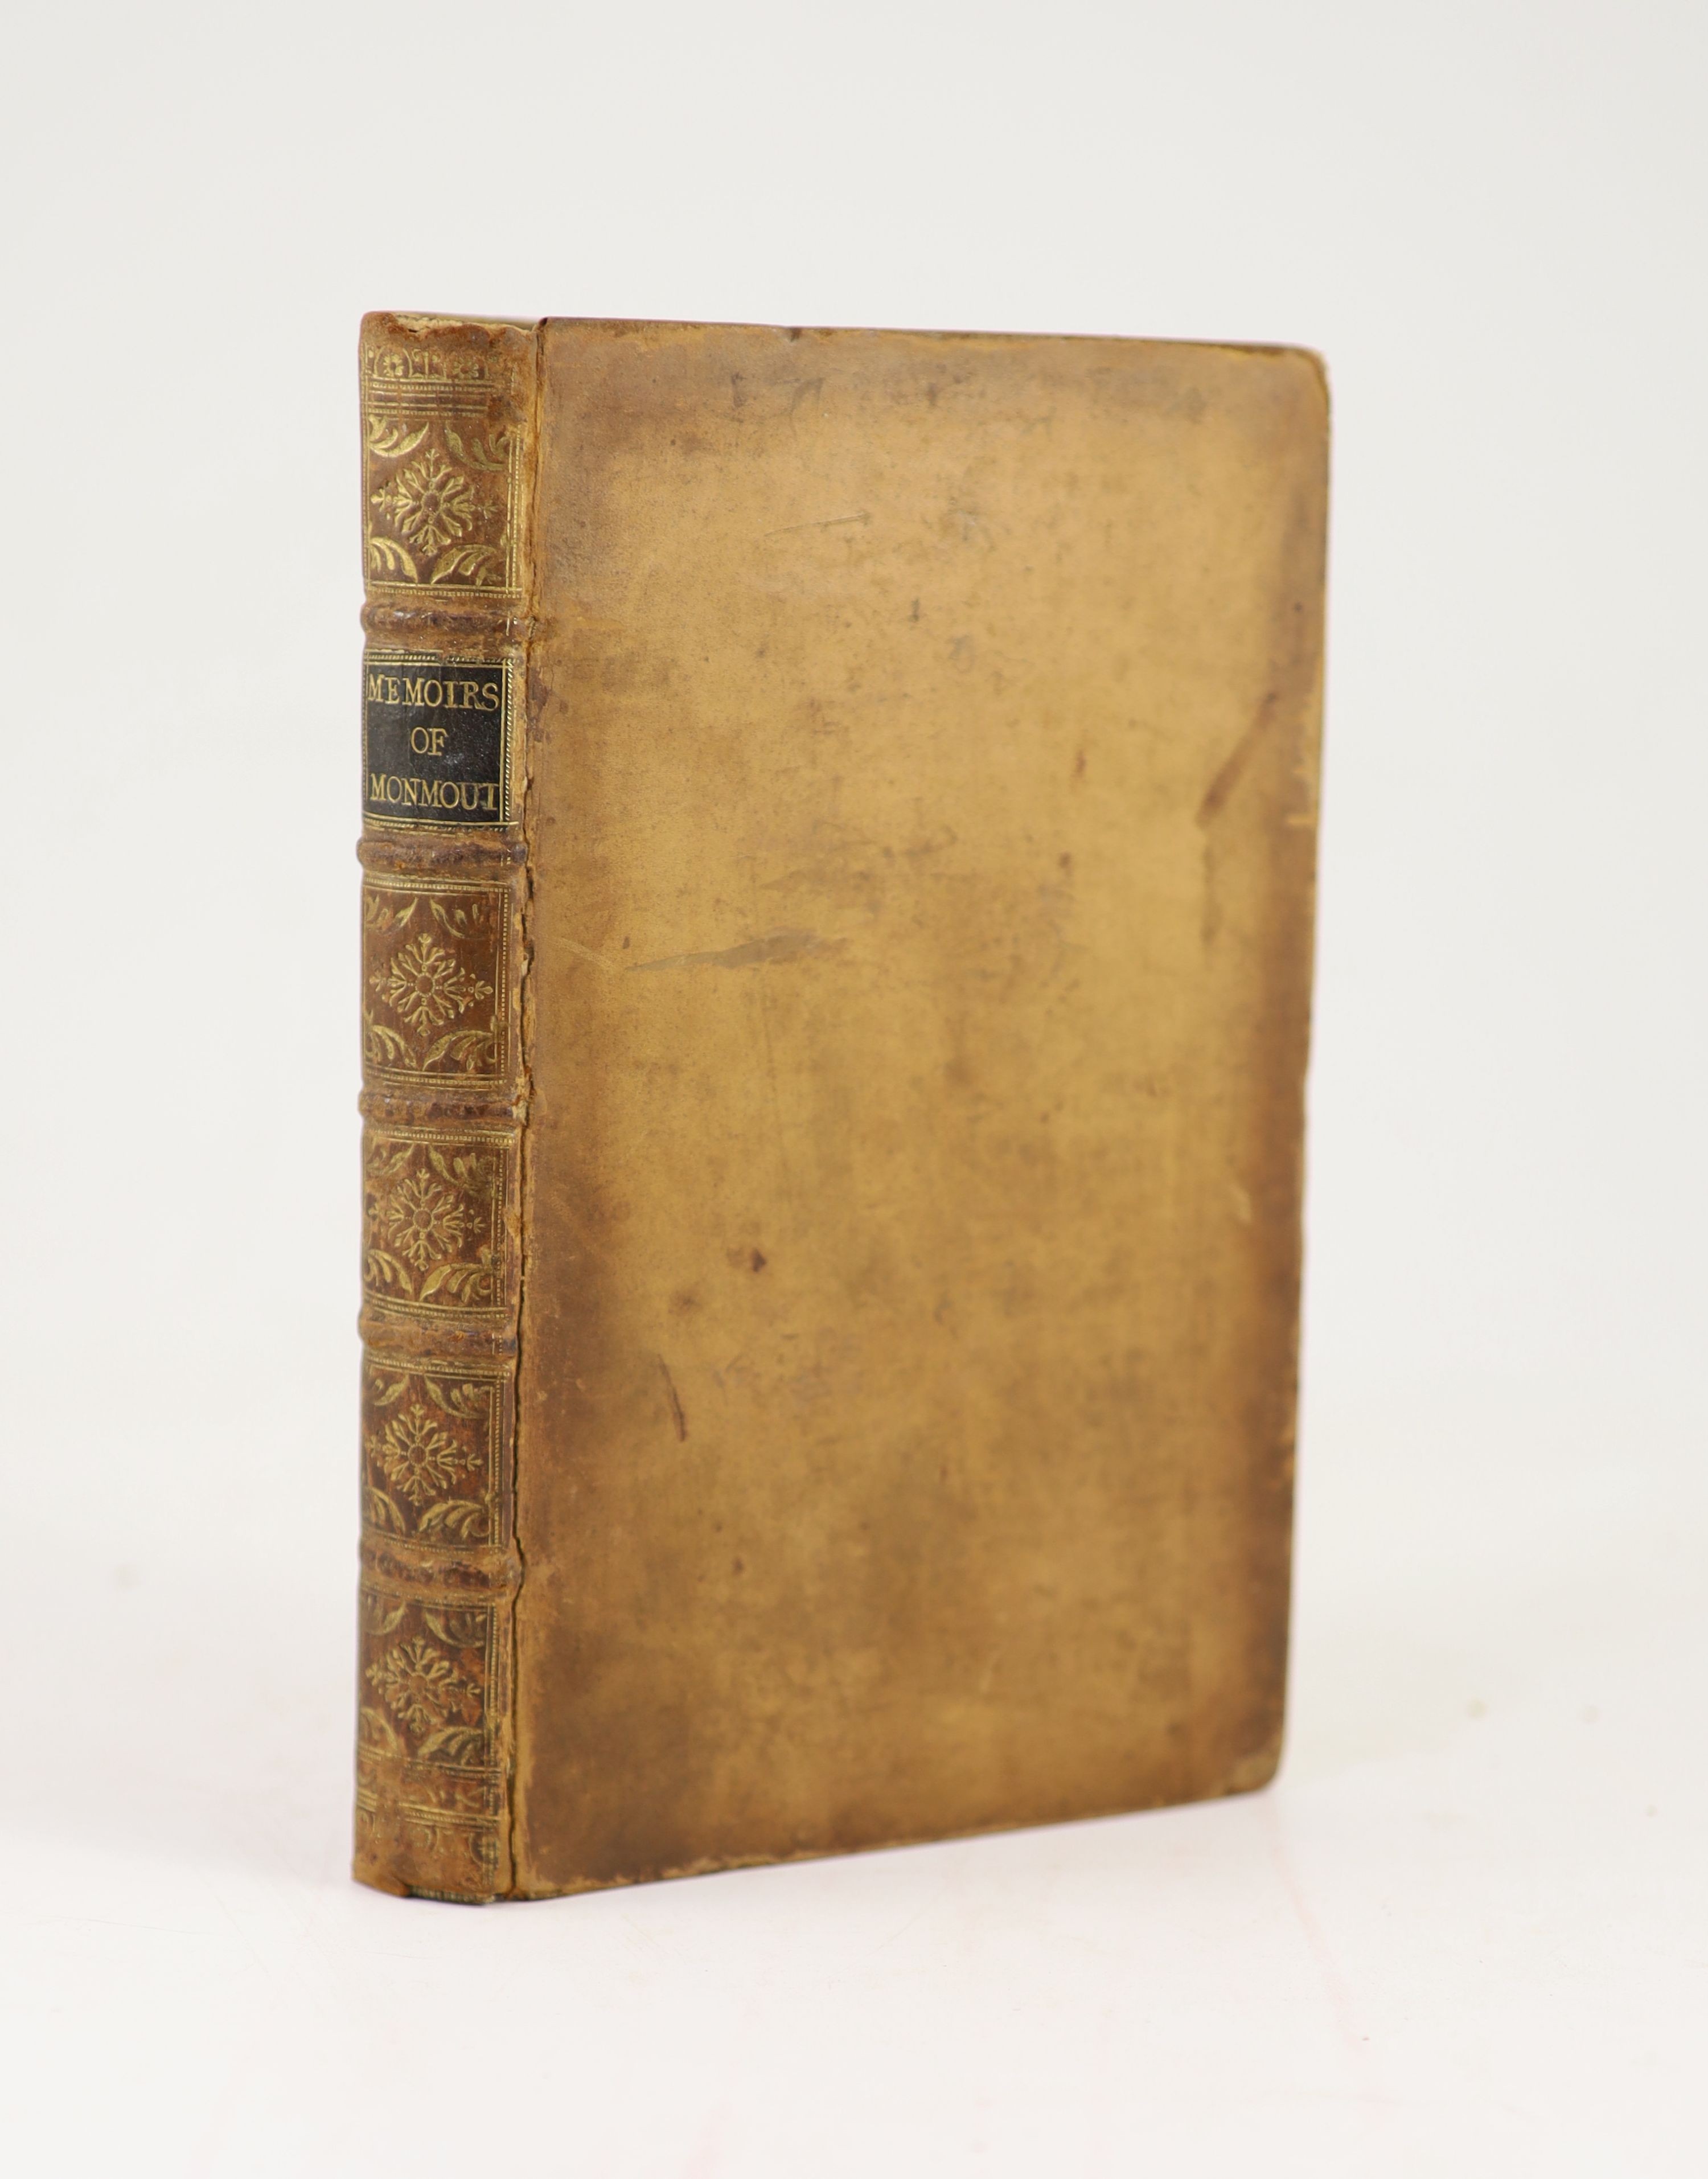 Cary, Robert – Memoirs of the Life of Robert Cary, Barron of Leppington, and Earl of Monmouth... Complete with engraved frontis. Calf, Gilt panelled spine with morocco label. R. and J Dodsley, London, 1759 and